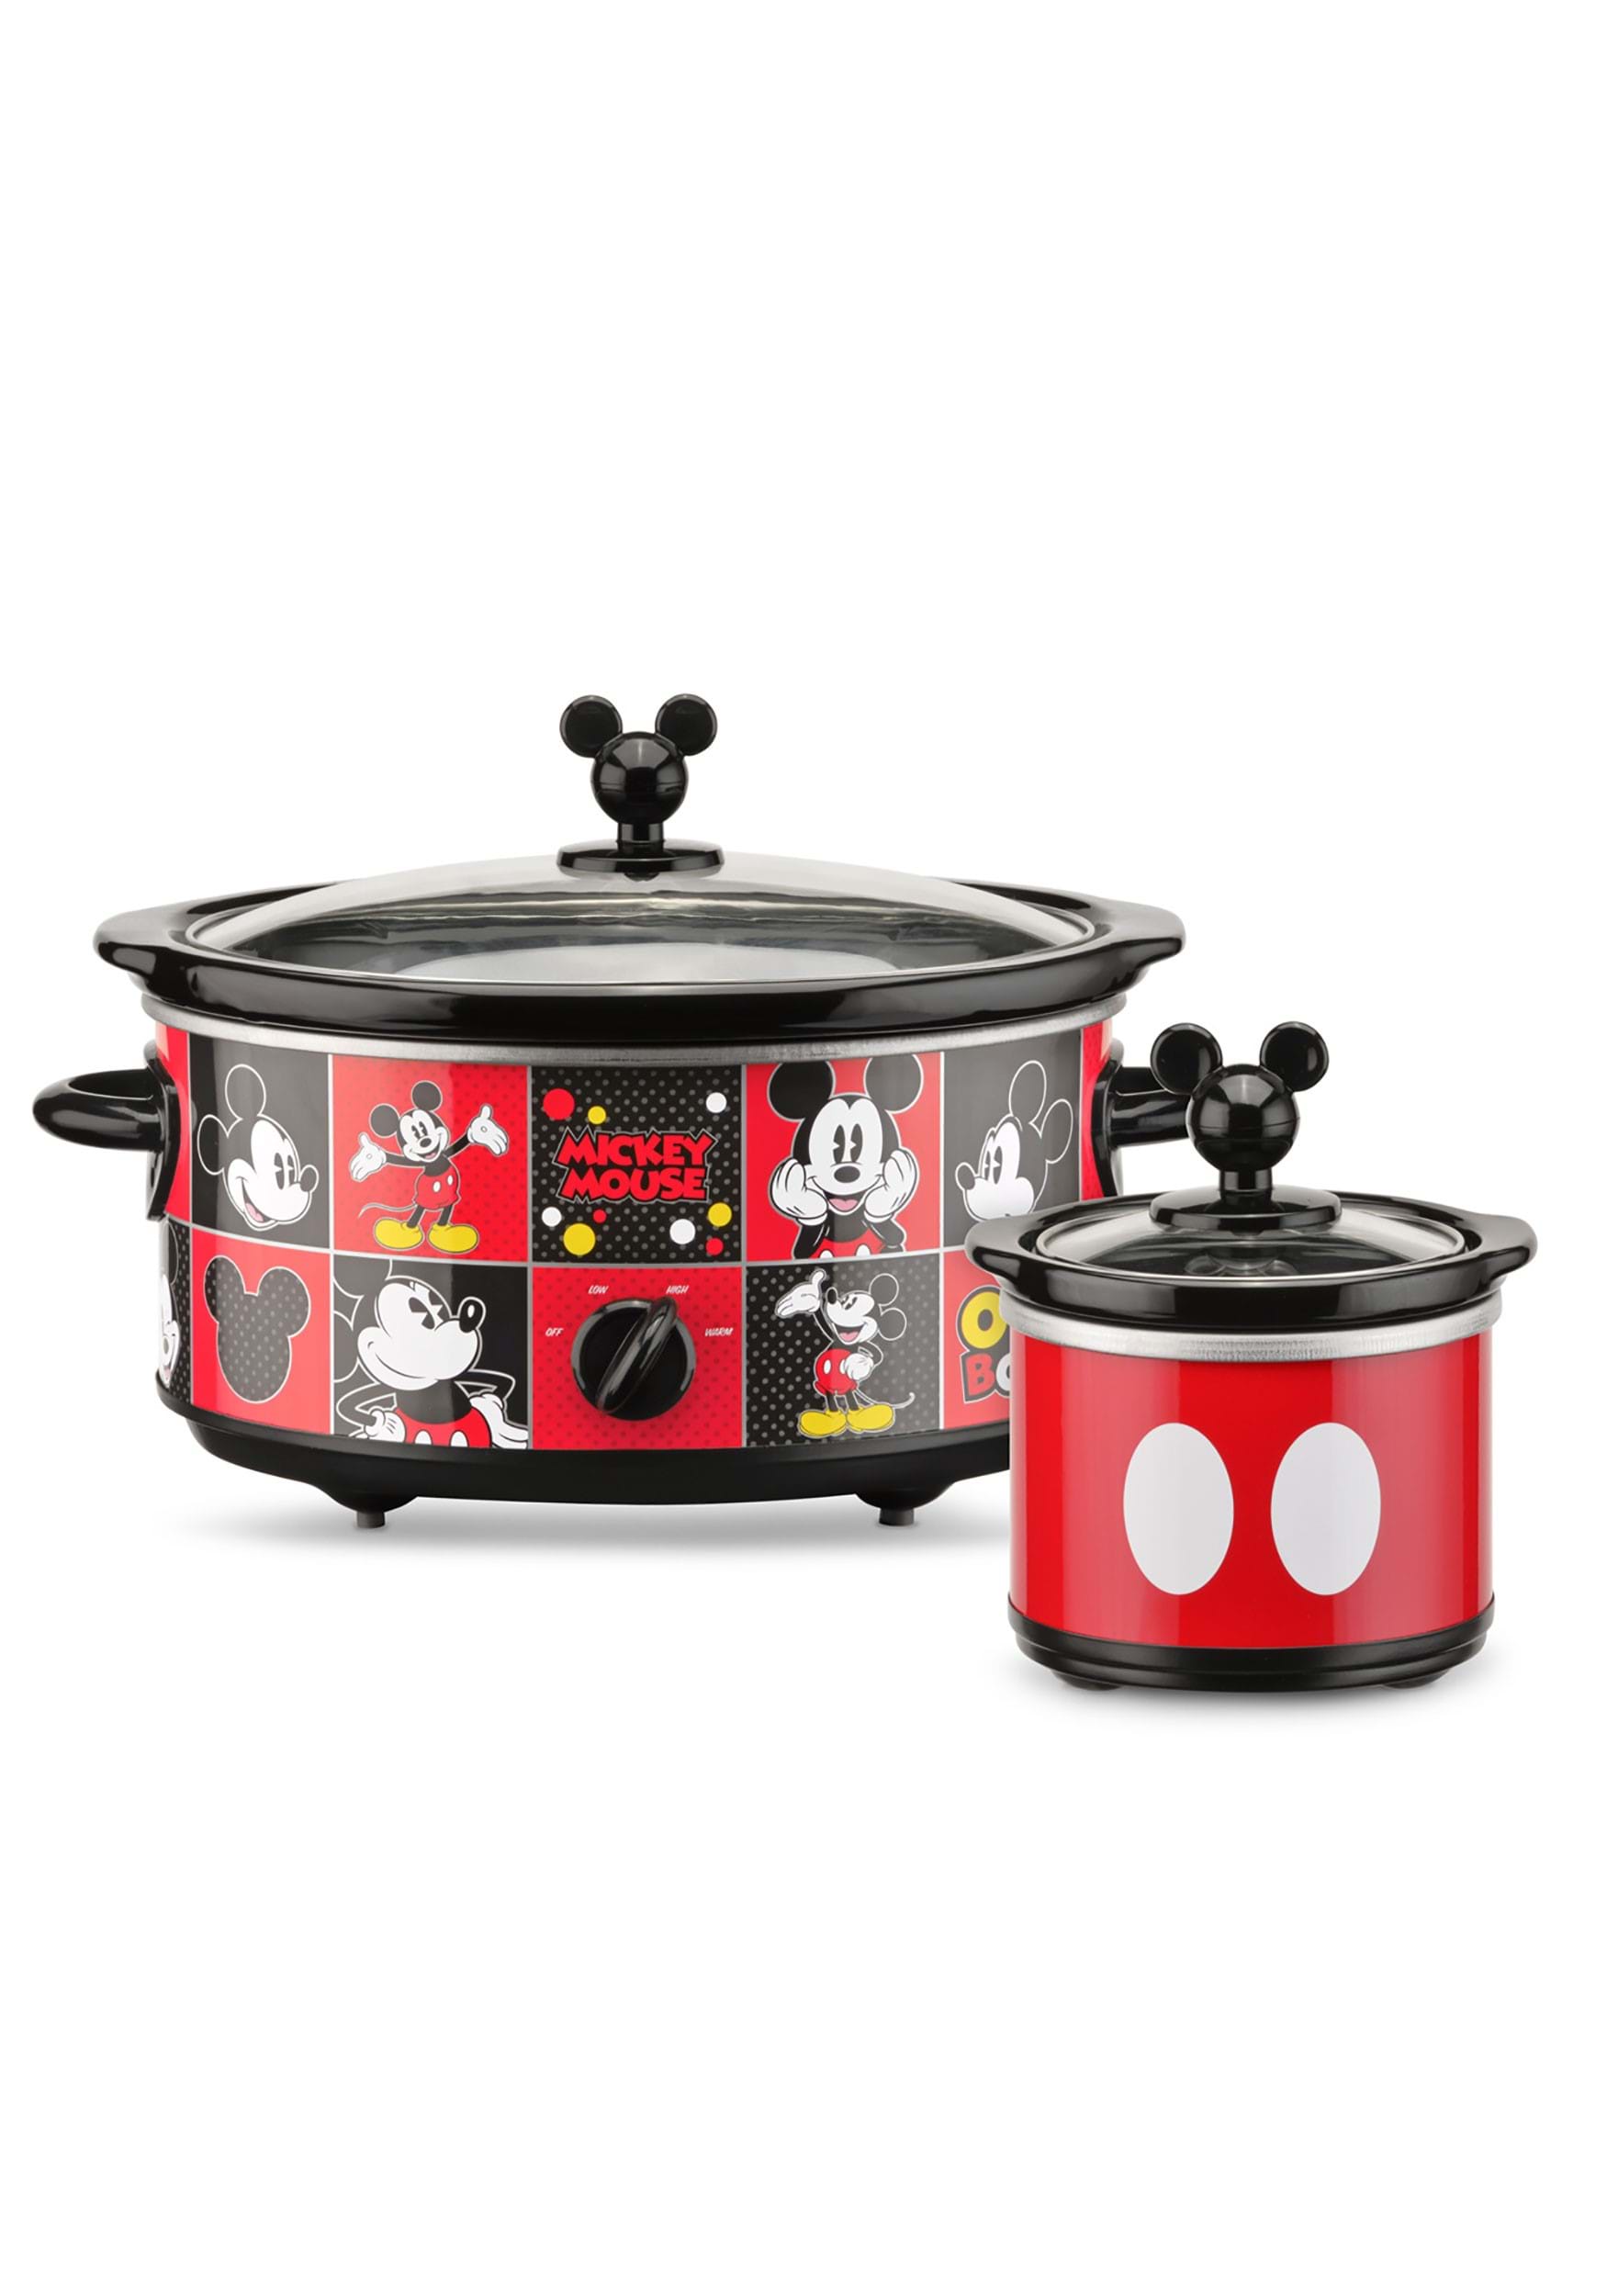 https://images.fun.com/products/49759/2-1-169829/mickey-mouse-5-qt-slow-cooker-w-dipper-alt-1.jpg